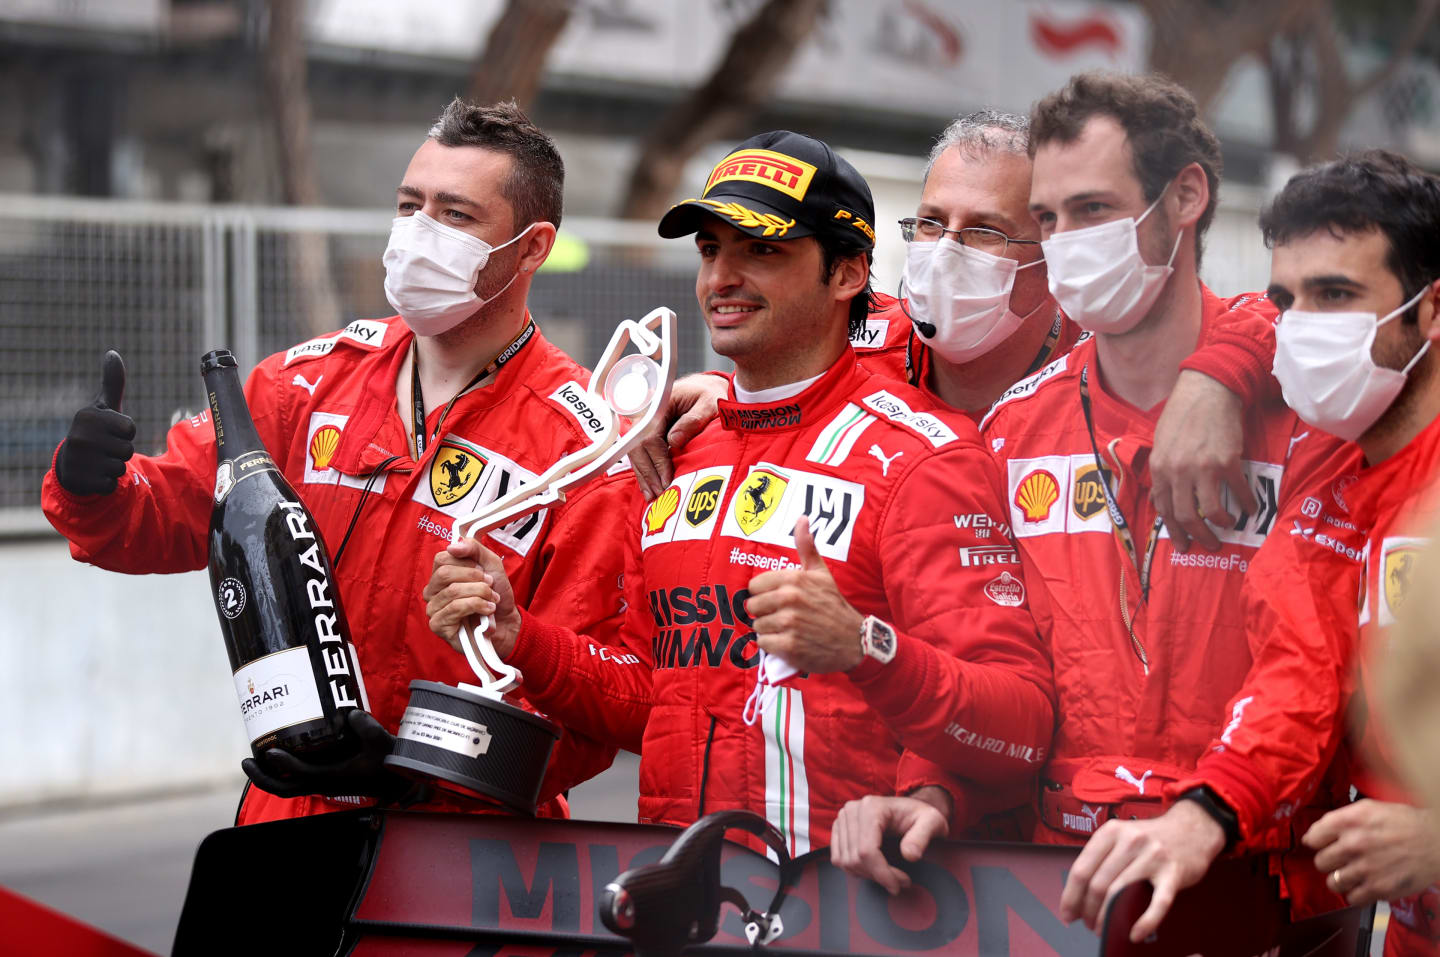 MONTE-CARLO, MONACO - MAY 23: Second placed Carlos Sainz of Spain and Ferrari celebrates with his team in parc ferme during the F1 Grand Prix of Monaco at Circuit de Monaco on May 23, 2021 in Monte-Carlo, Monaco. (Photo by Lars Baron/Getty Images)